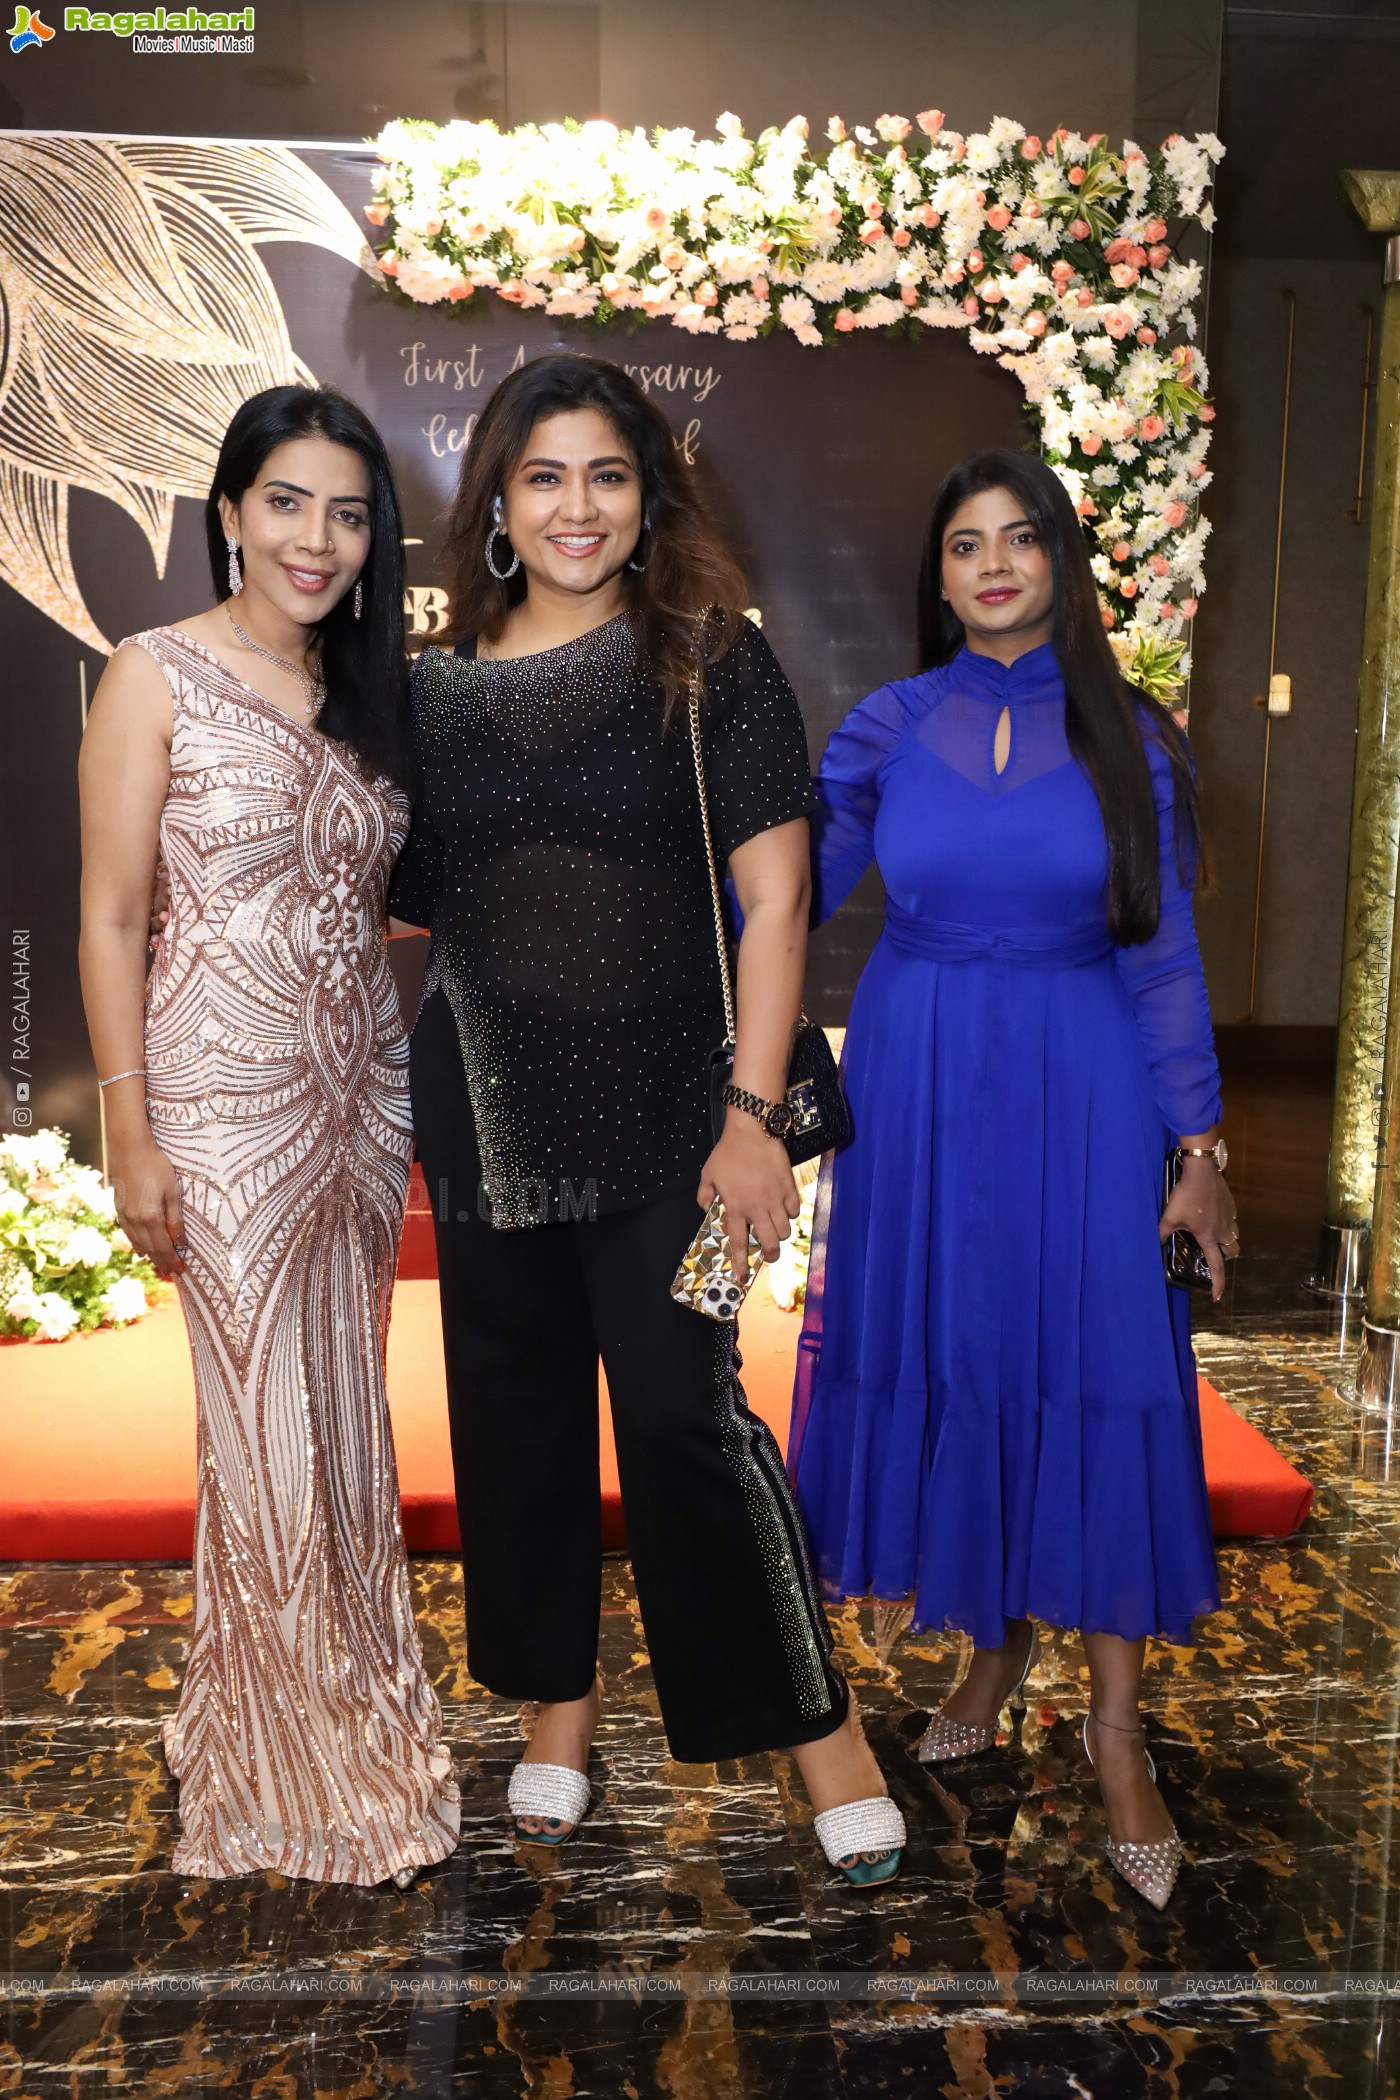 Brillare Clinic Celebrates First Anniversary with Gratitude and Glamour